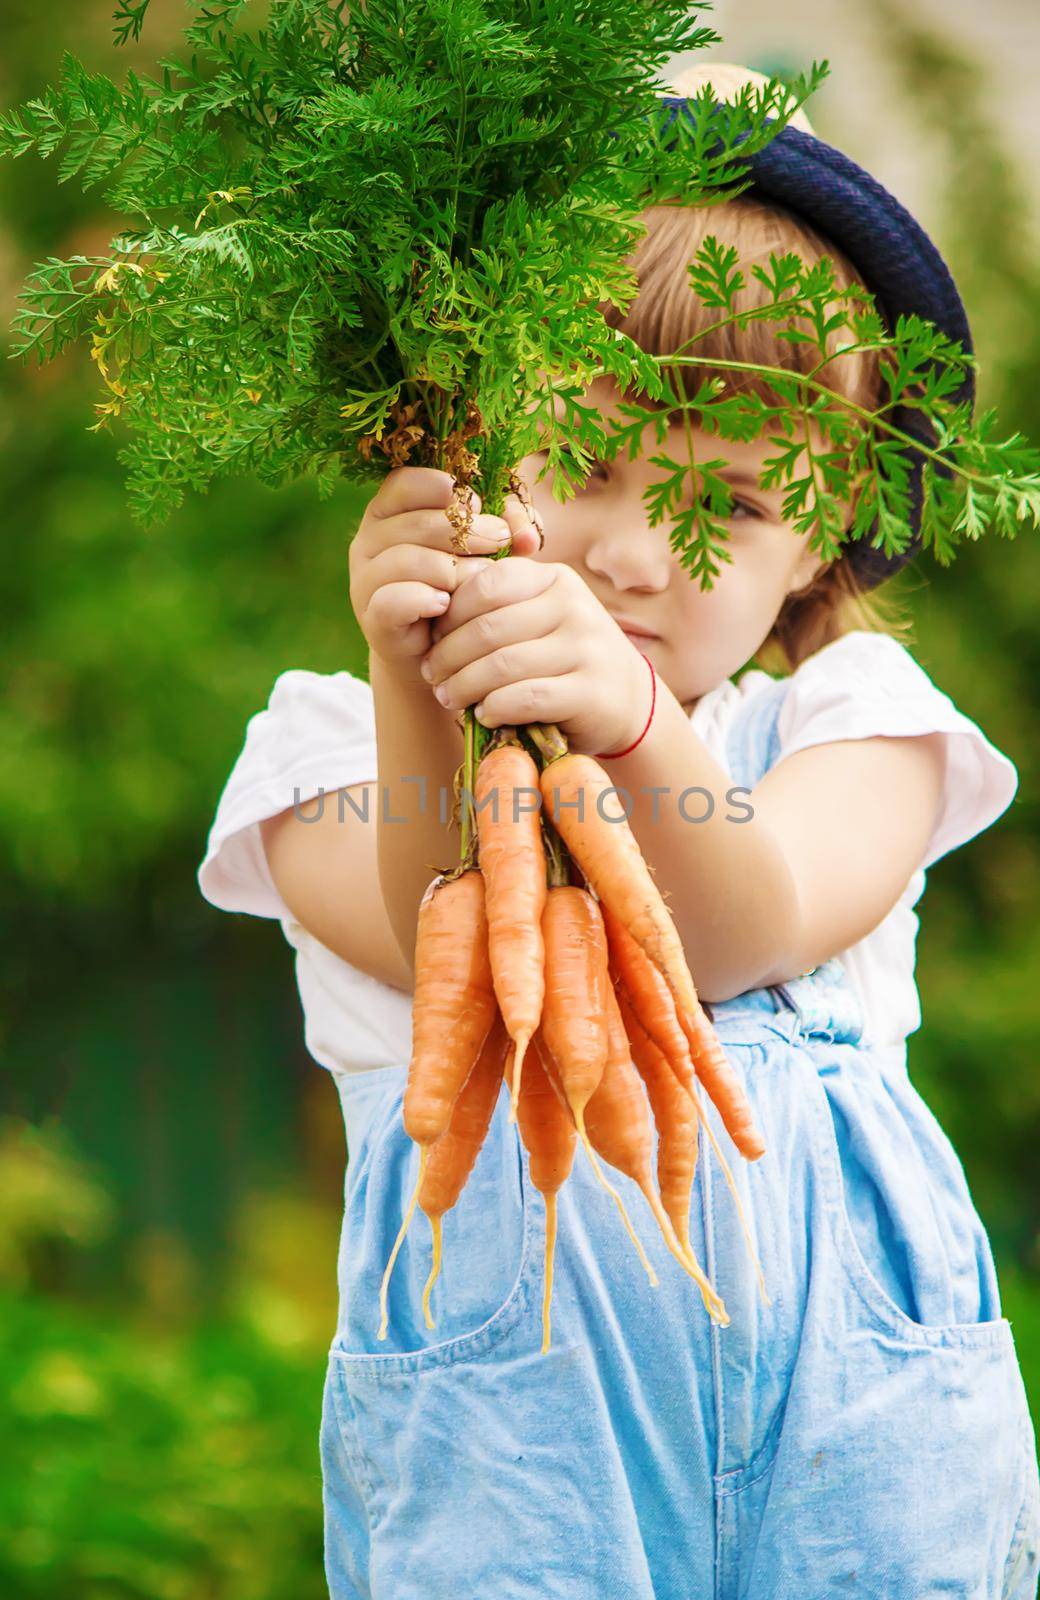 Child and vegetables on the farm. Selective focus. nature.